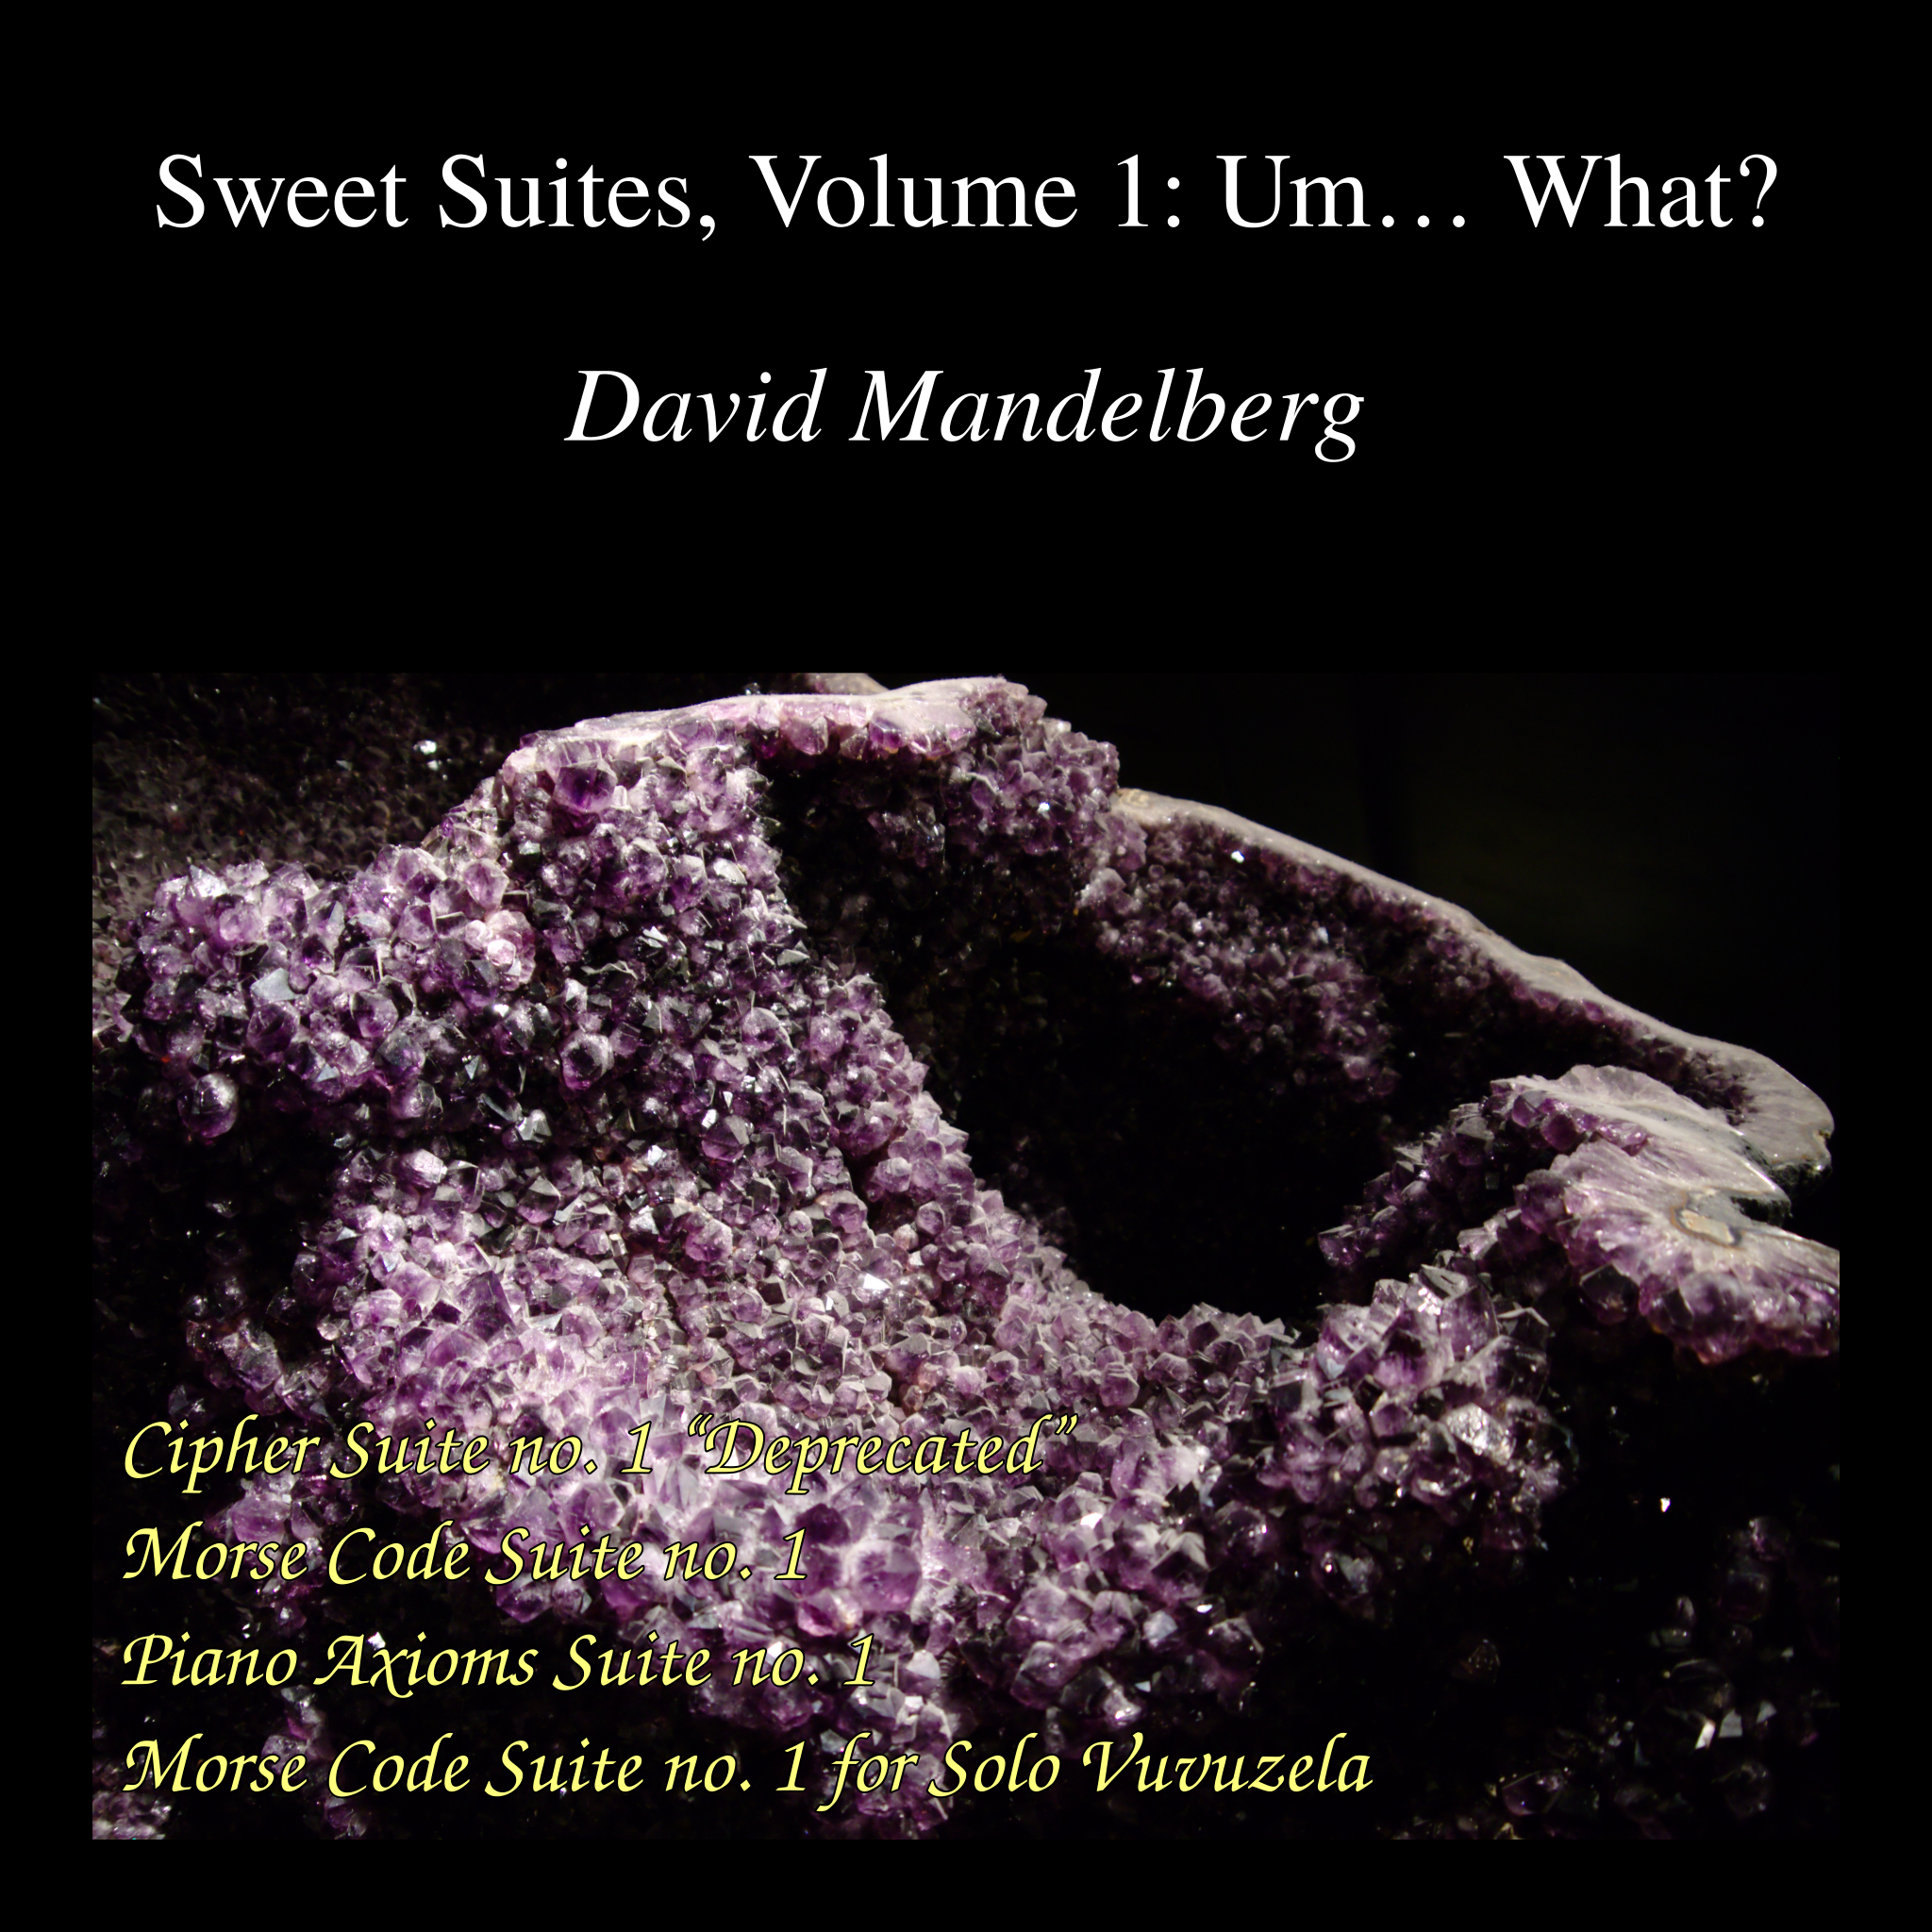 album art, from top to bottom: "Sweet Suites, Volume 1: Um… What?" / "David Mandelberg" / picture of a geode / "Cipher Suite no. 1 “Deprecated”" / "Morse Code Suite no. 1" / "Piano Axioms Suite no. 1" "Morse Code Suite no. 1 for Solo Vuvuzela"